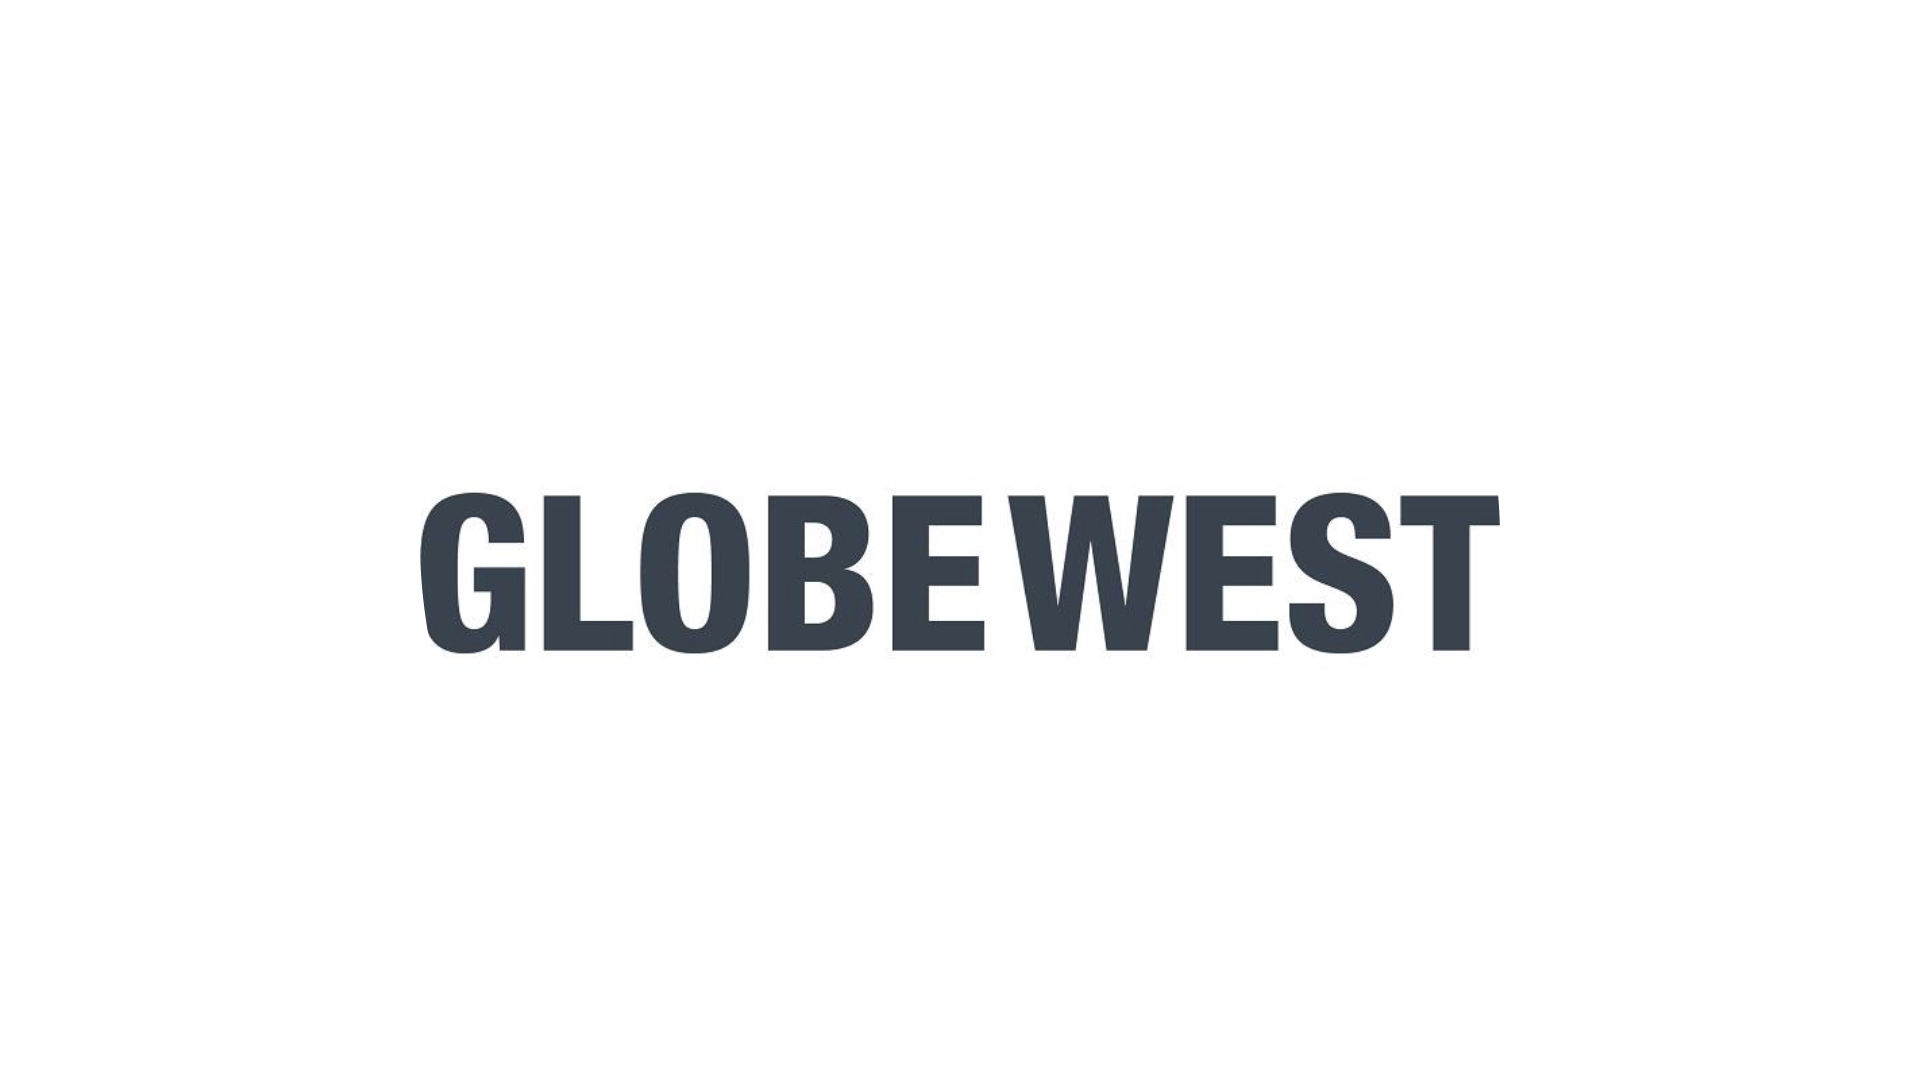 Get the White on White style by shopping with Globewest